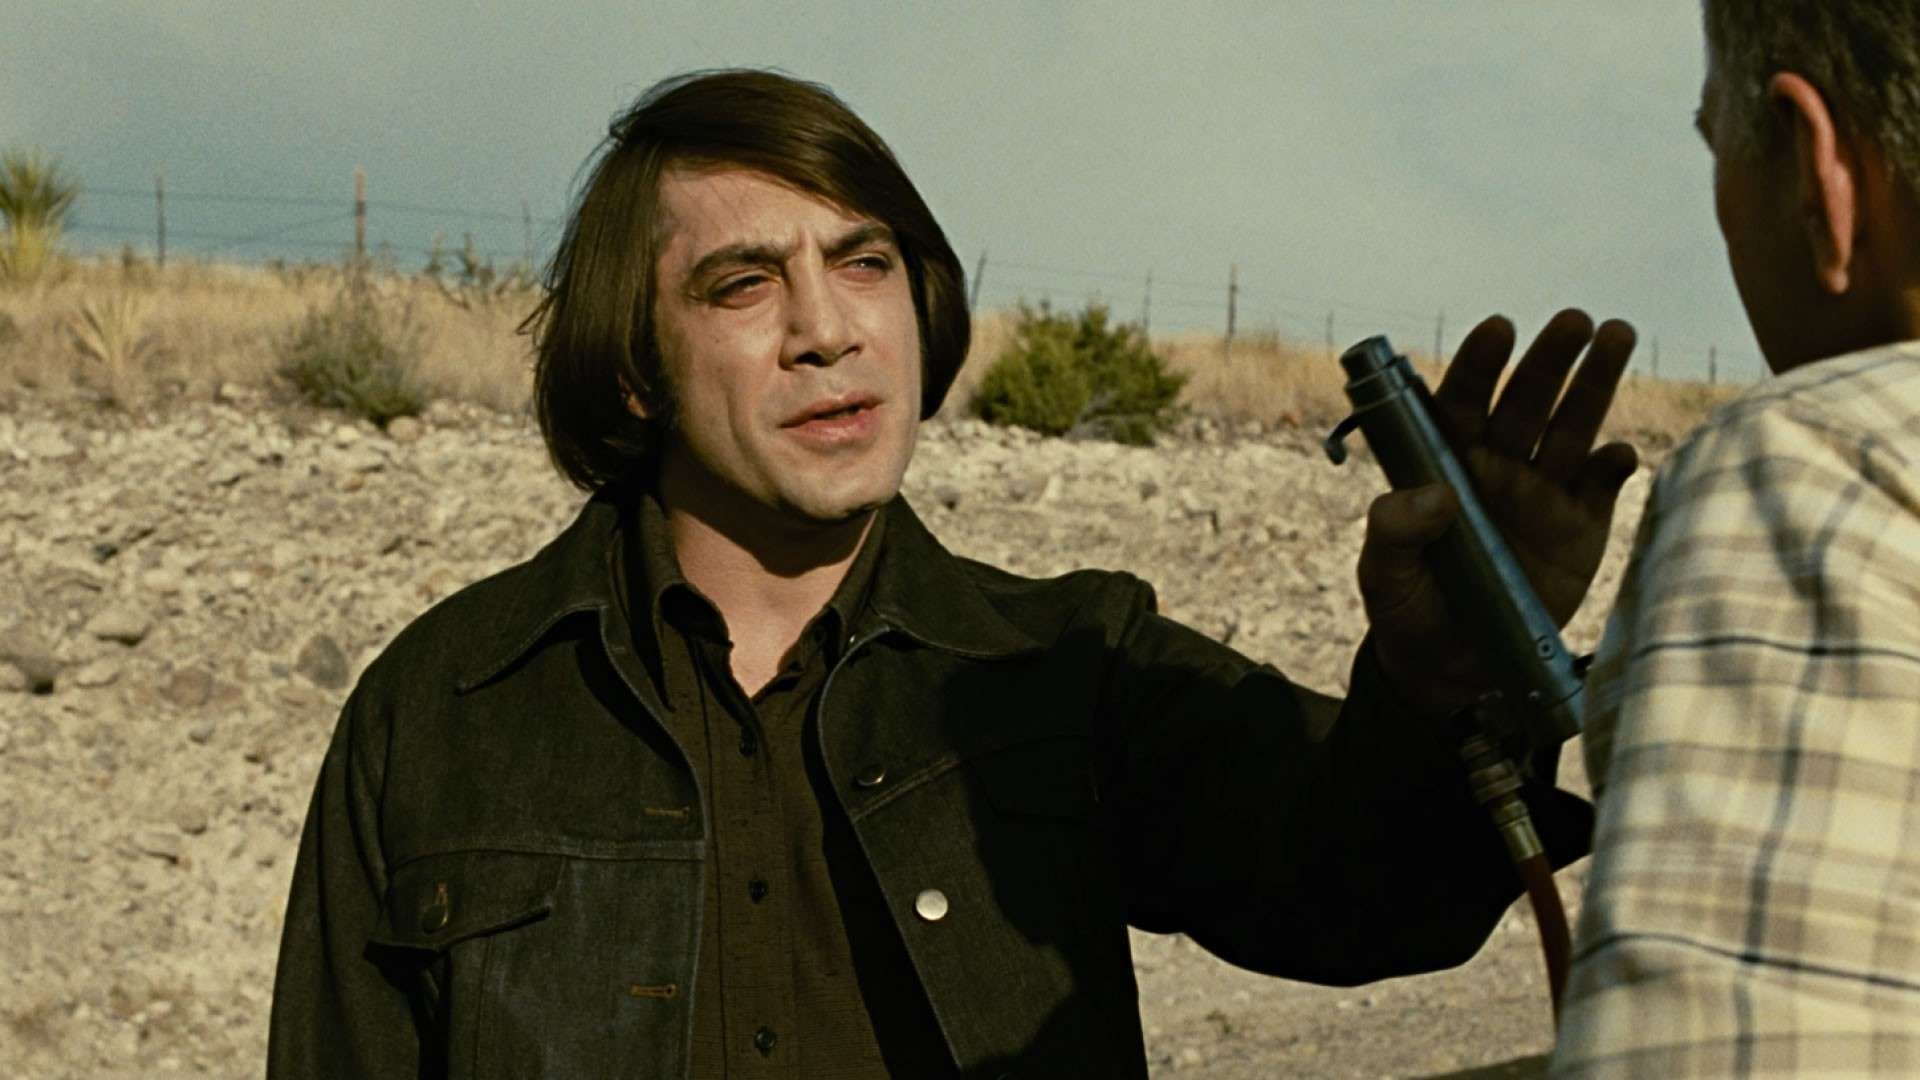 No Country For Old Men (Movie): Anton Chigurh, Best Direction at 2008 BAFTA Awards for Joel and Ethan Coen. 1920x1080 Full HD Background.